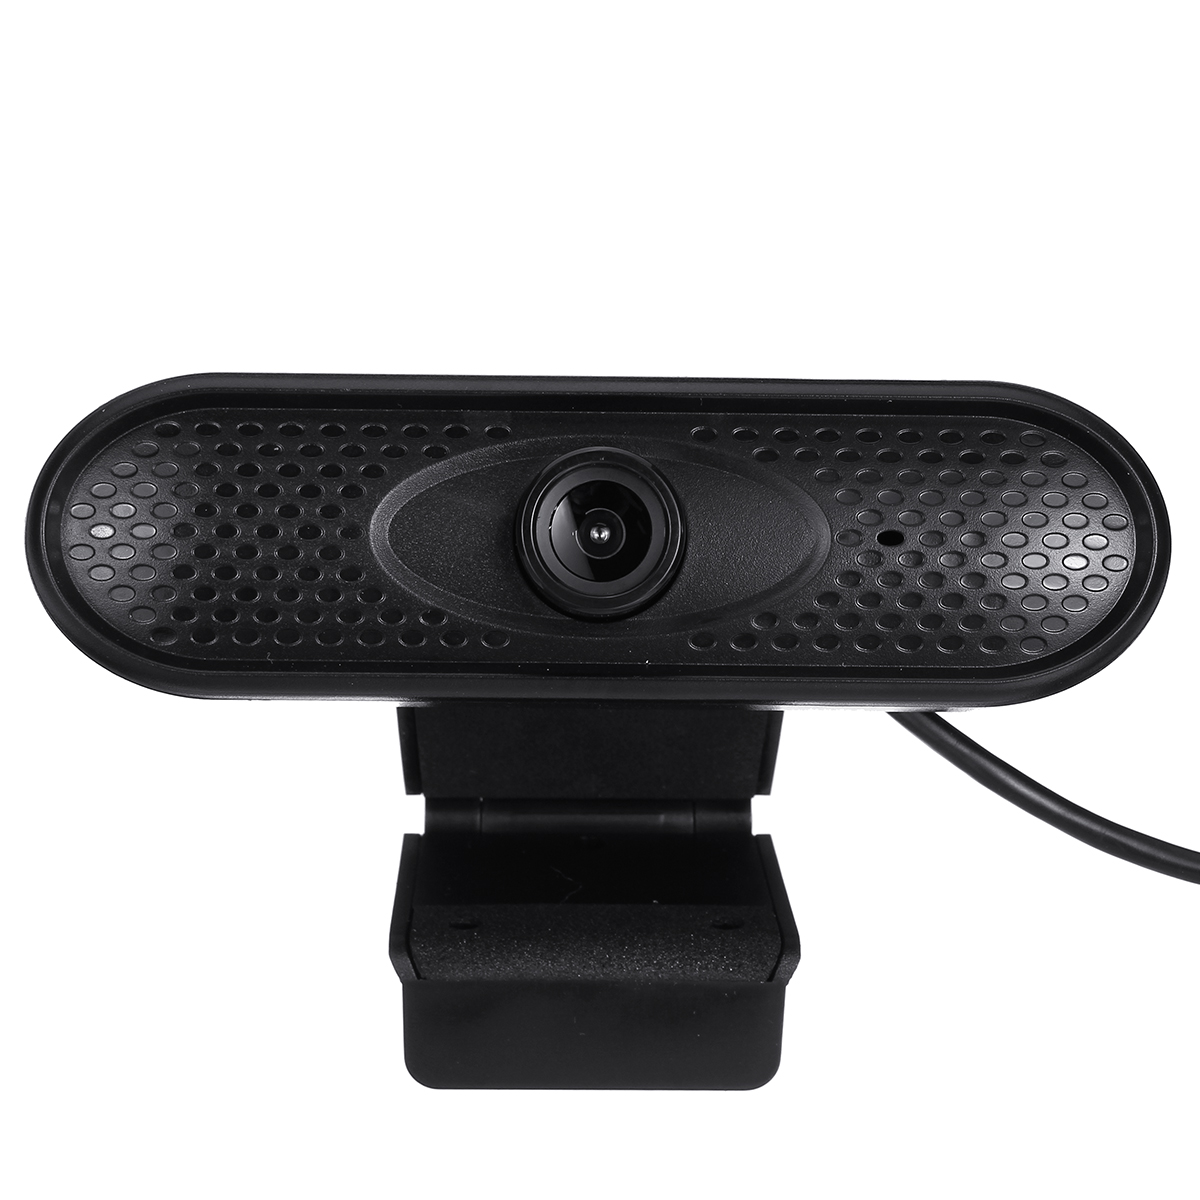 1080P-HD-USB-Webcam-Conference-Live-Manual-Focus-Computer-Camera-Built-in-Omni-directional-Micphone--1674541-1